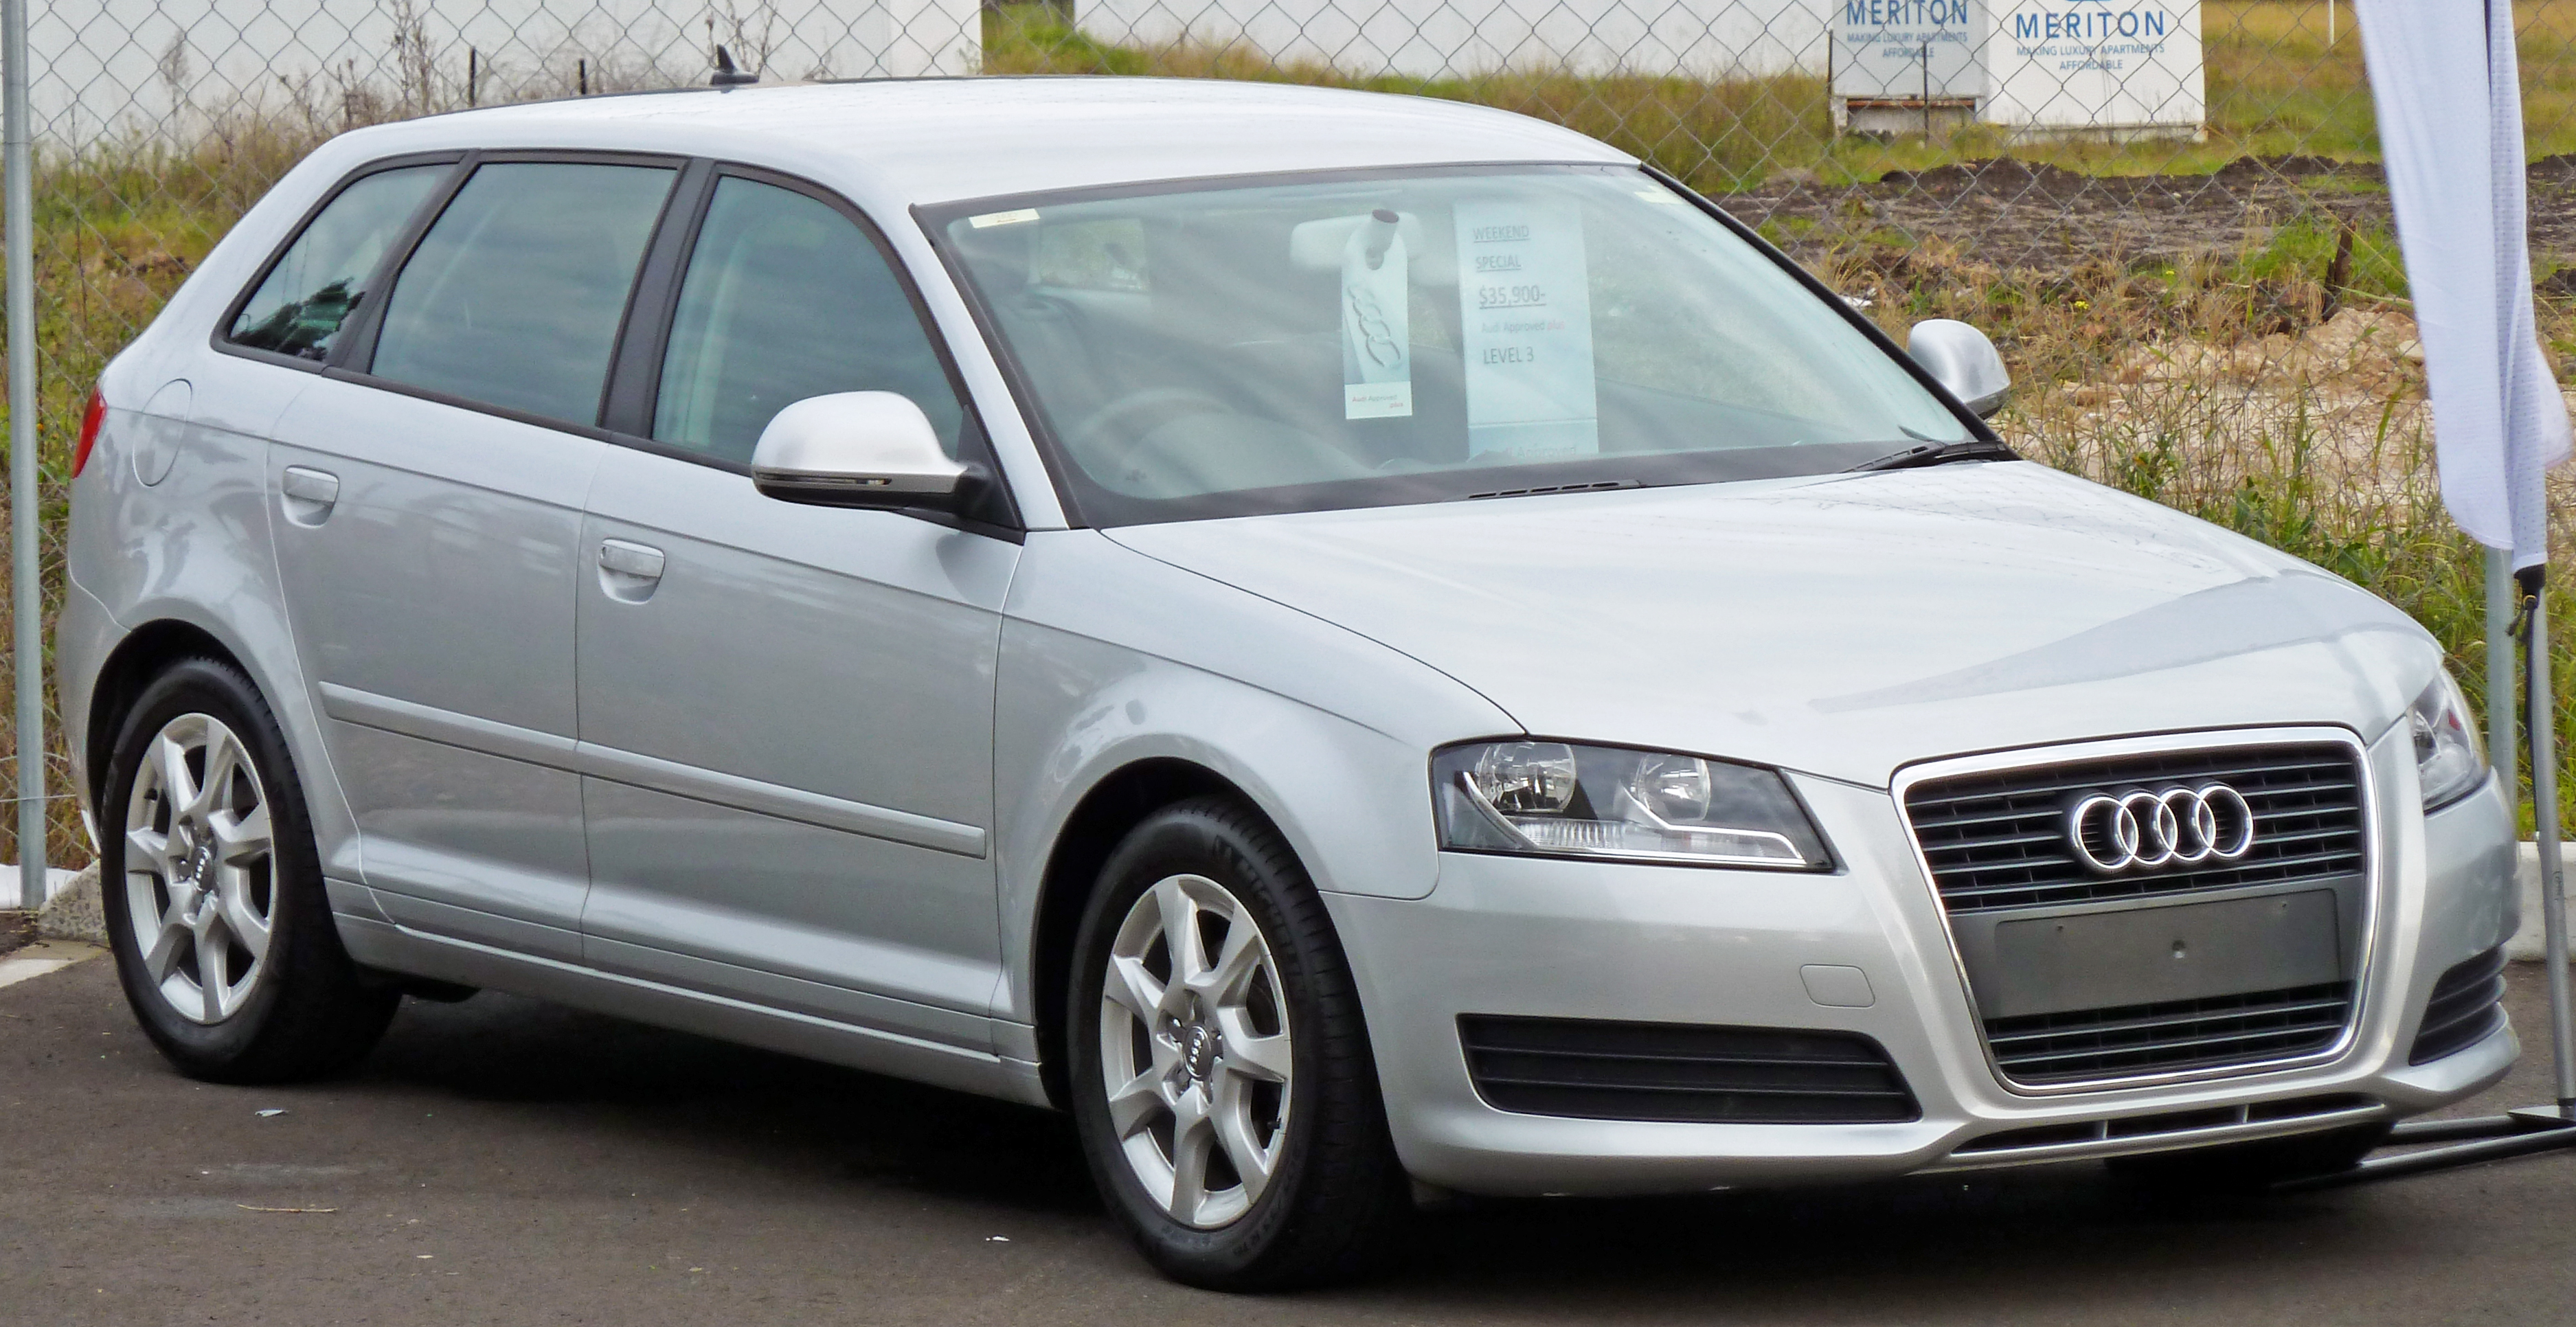 audi a3 related images,start 100 - WeiLi Automotive Network